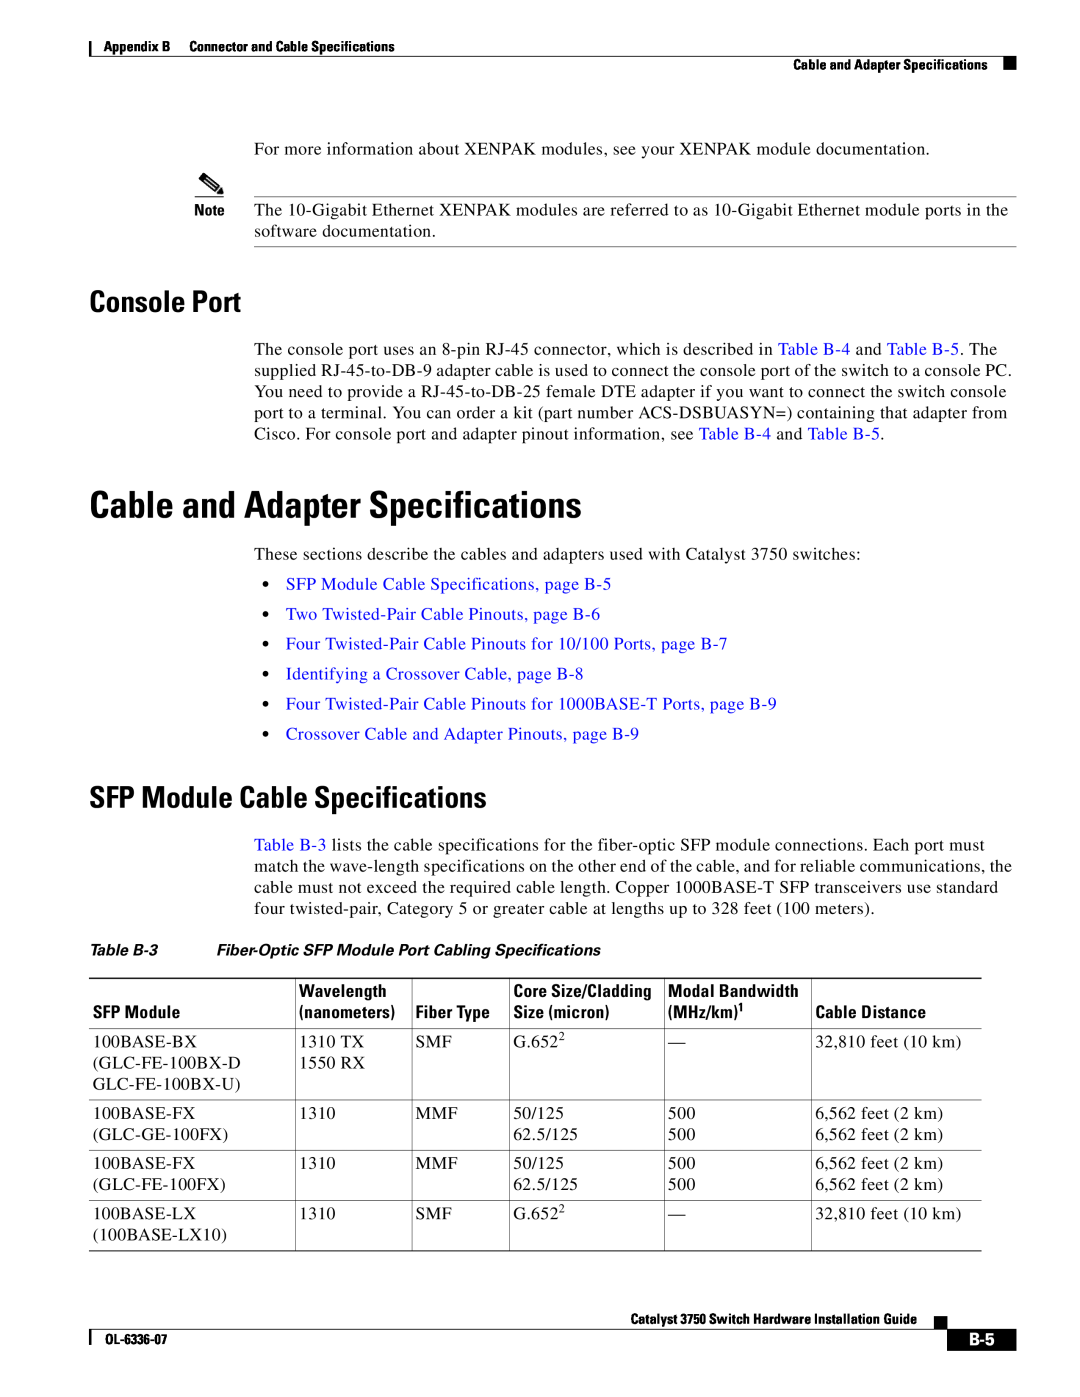 Cisco Systems WSC3750X24TS Cable and Adapter Specifications, SFP Module Cable Specifications, Console Port, Wavelength 